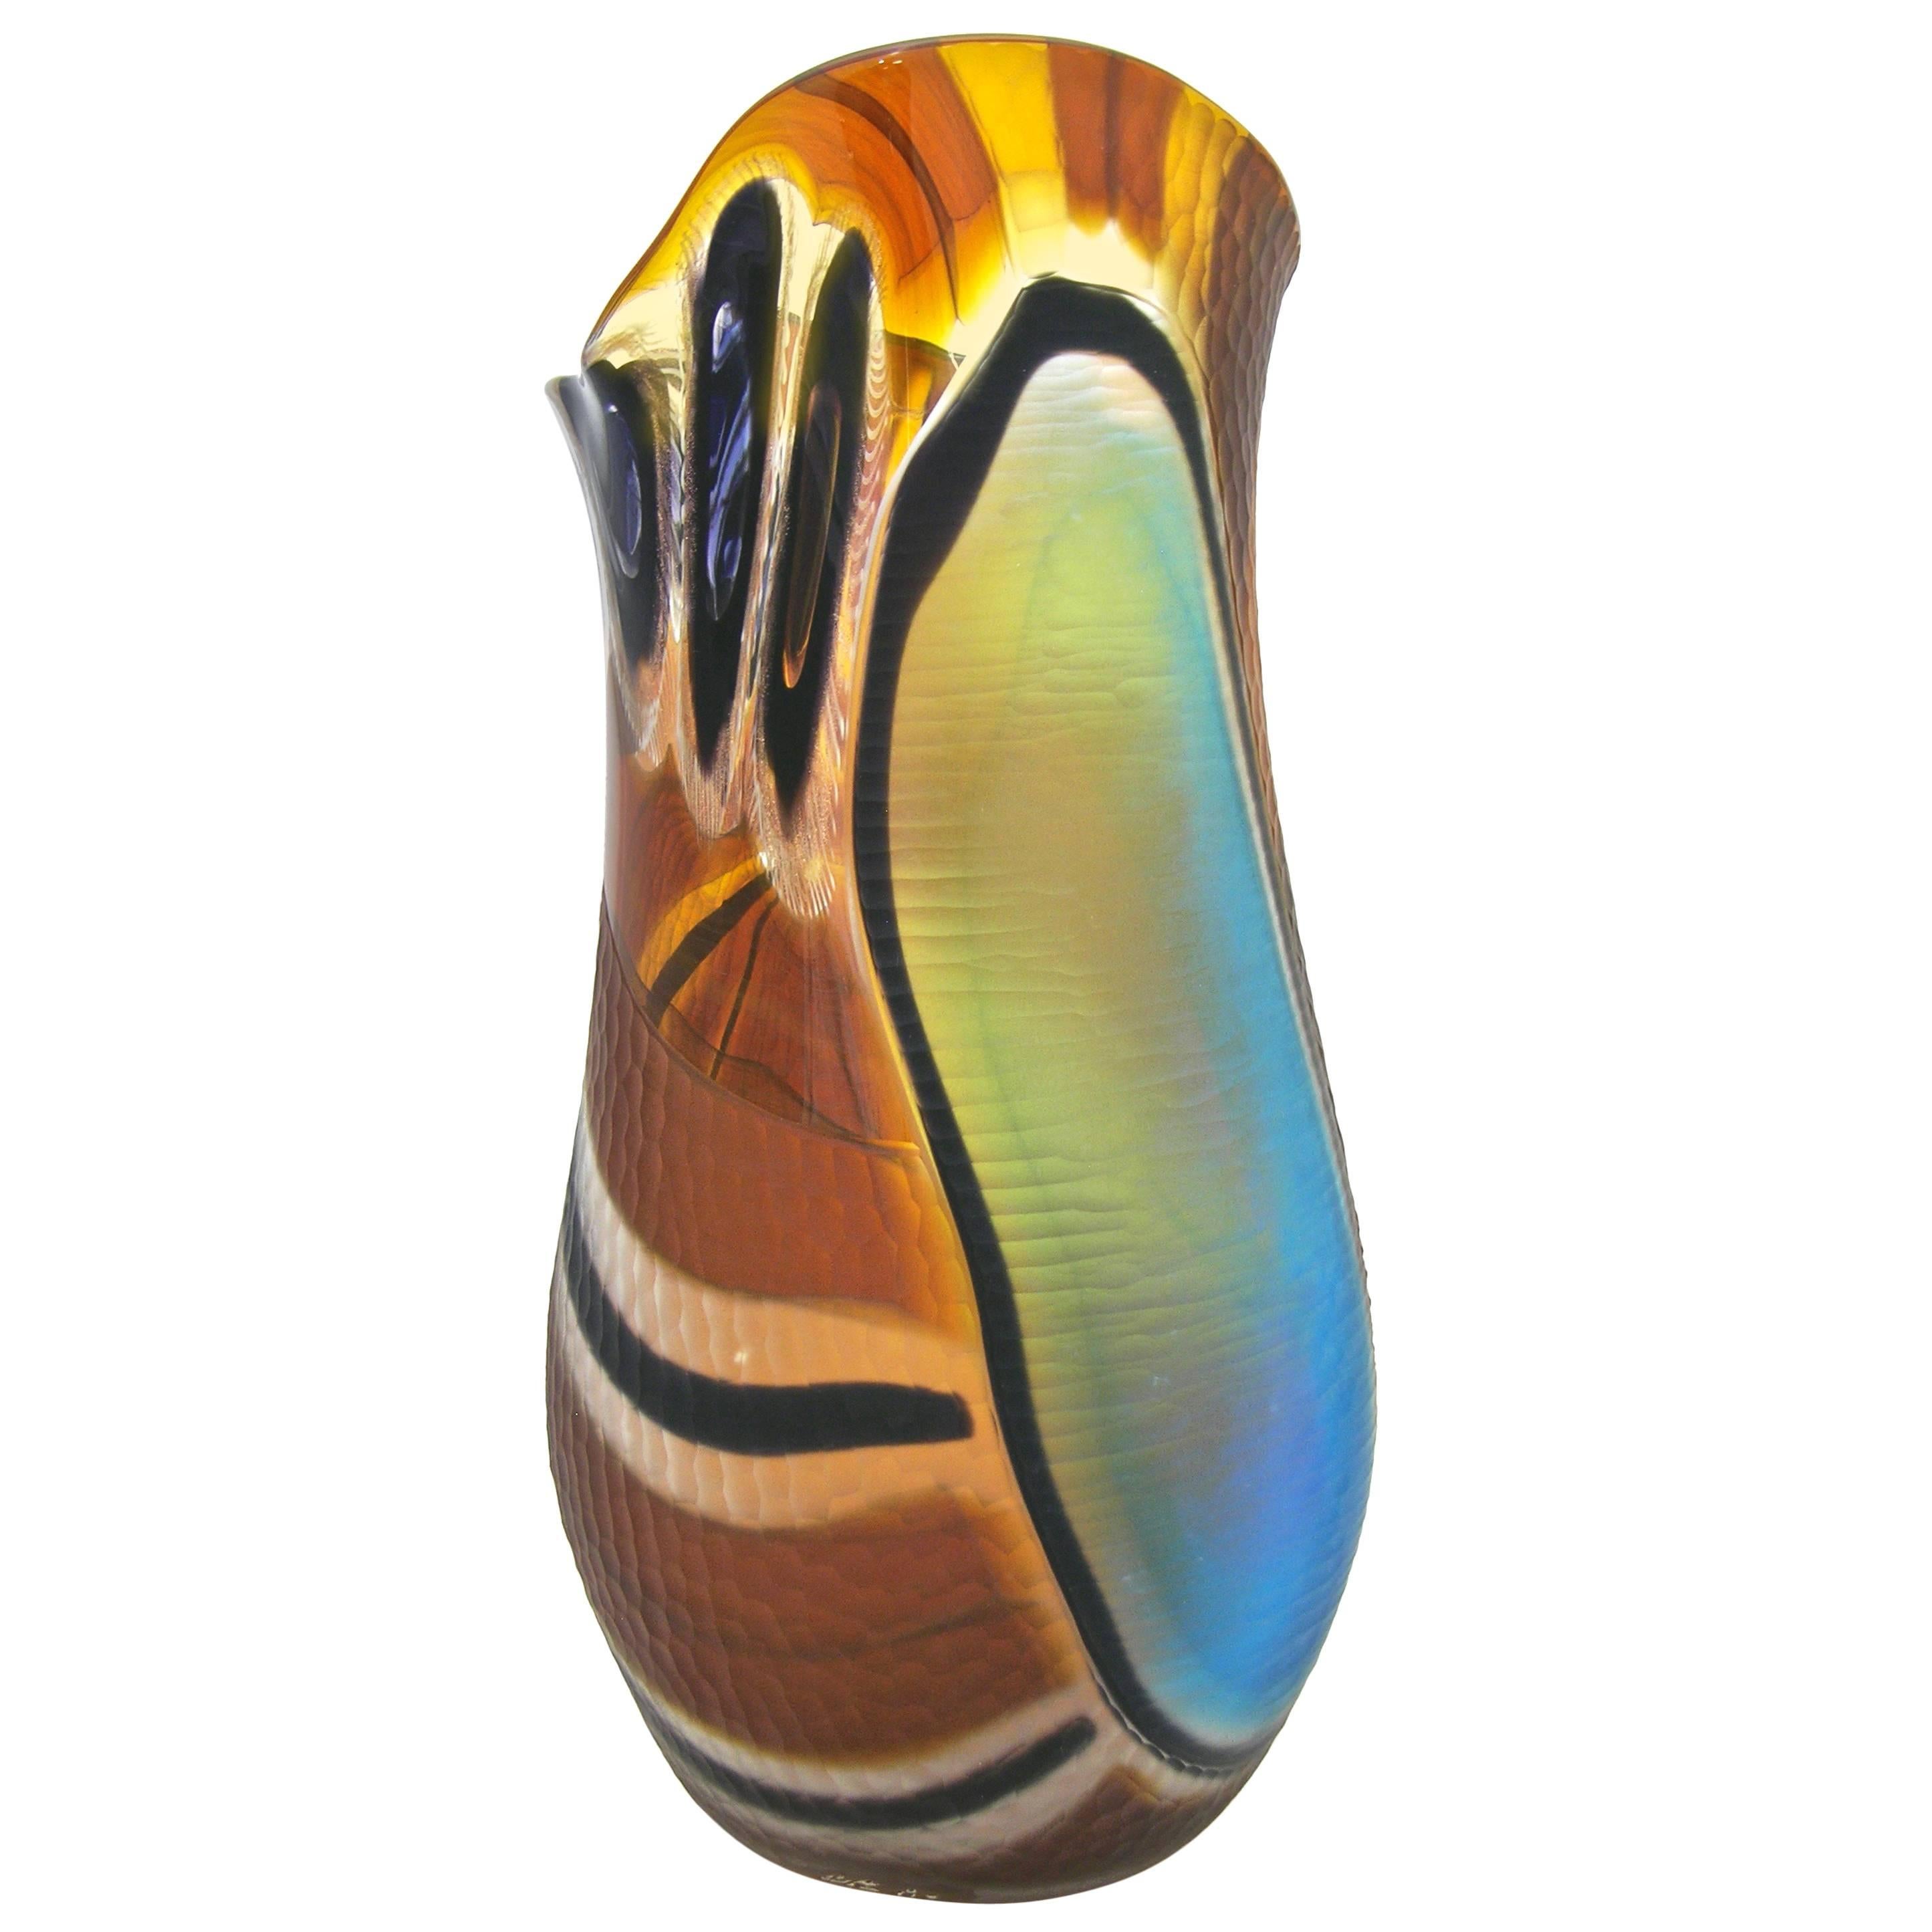 Cenedese 1990s Colorful Murano Glass Vase with Blue Black and Gold Murrine